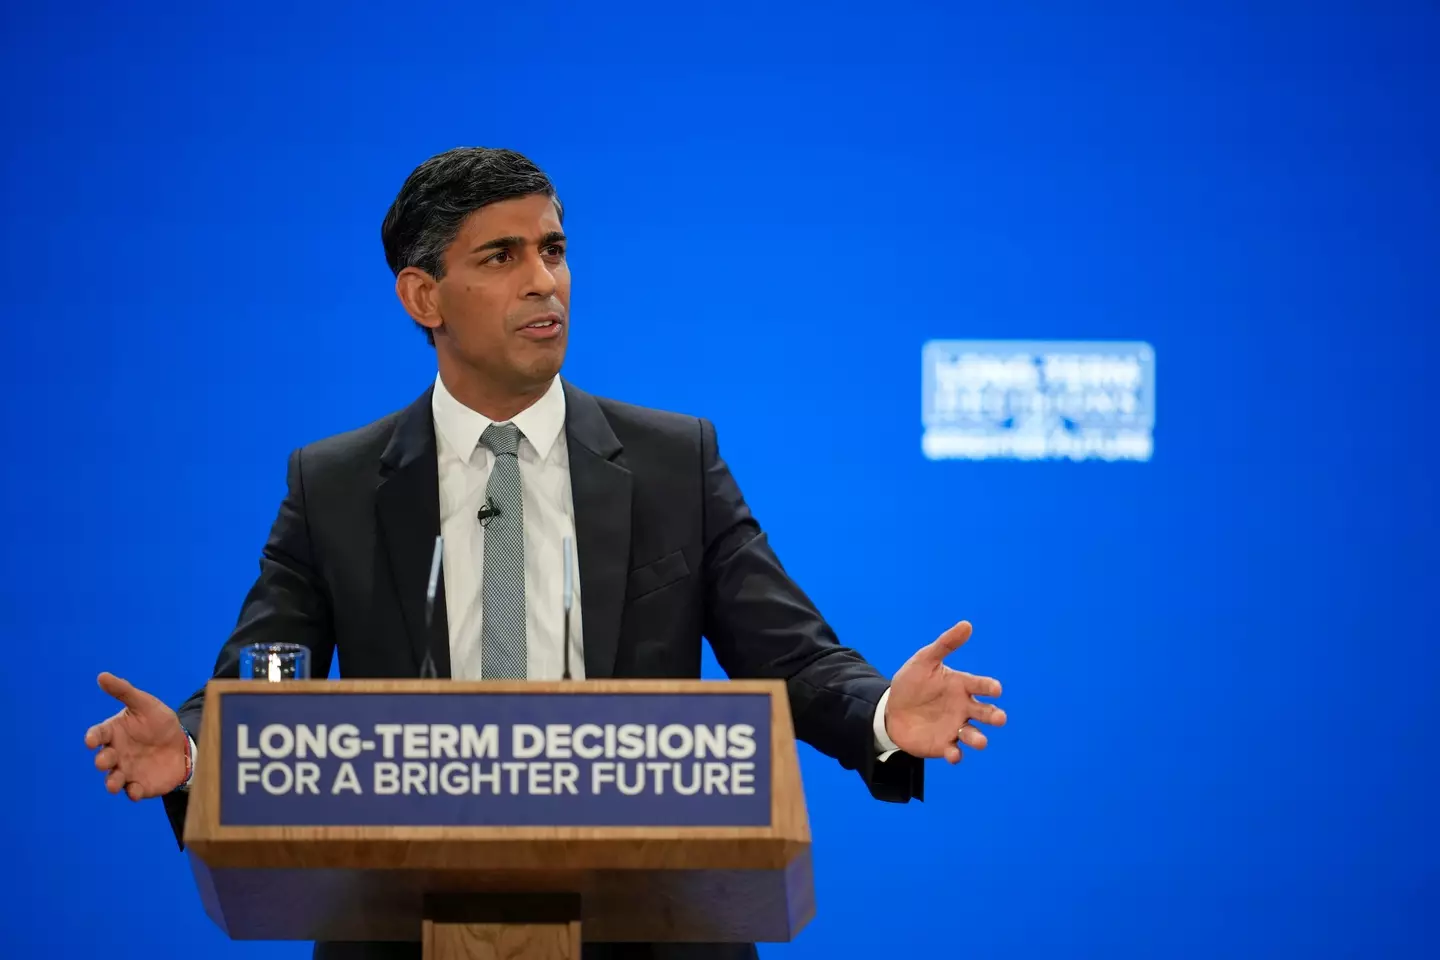 Rishi Sunak unveiled the plans in his Conservative Party Conference speech.